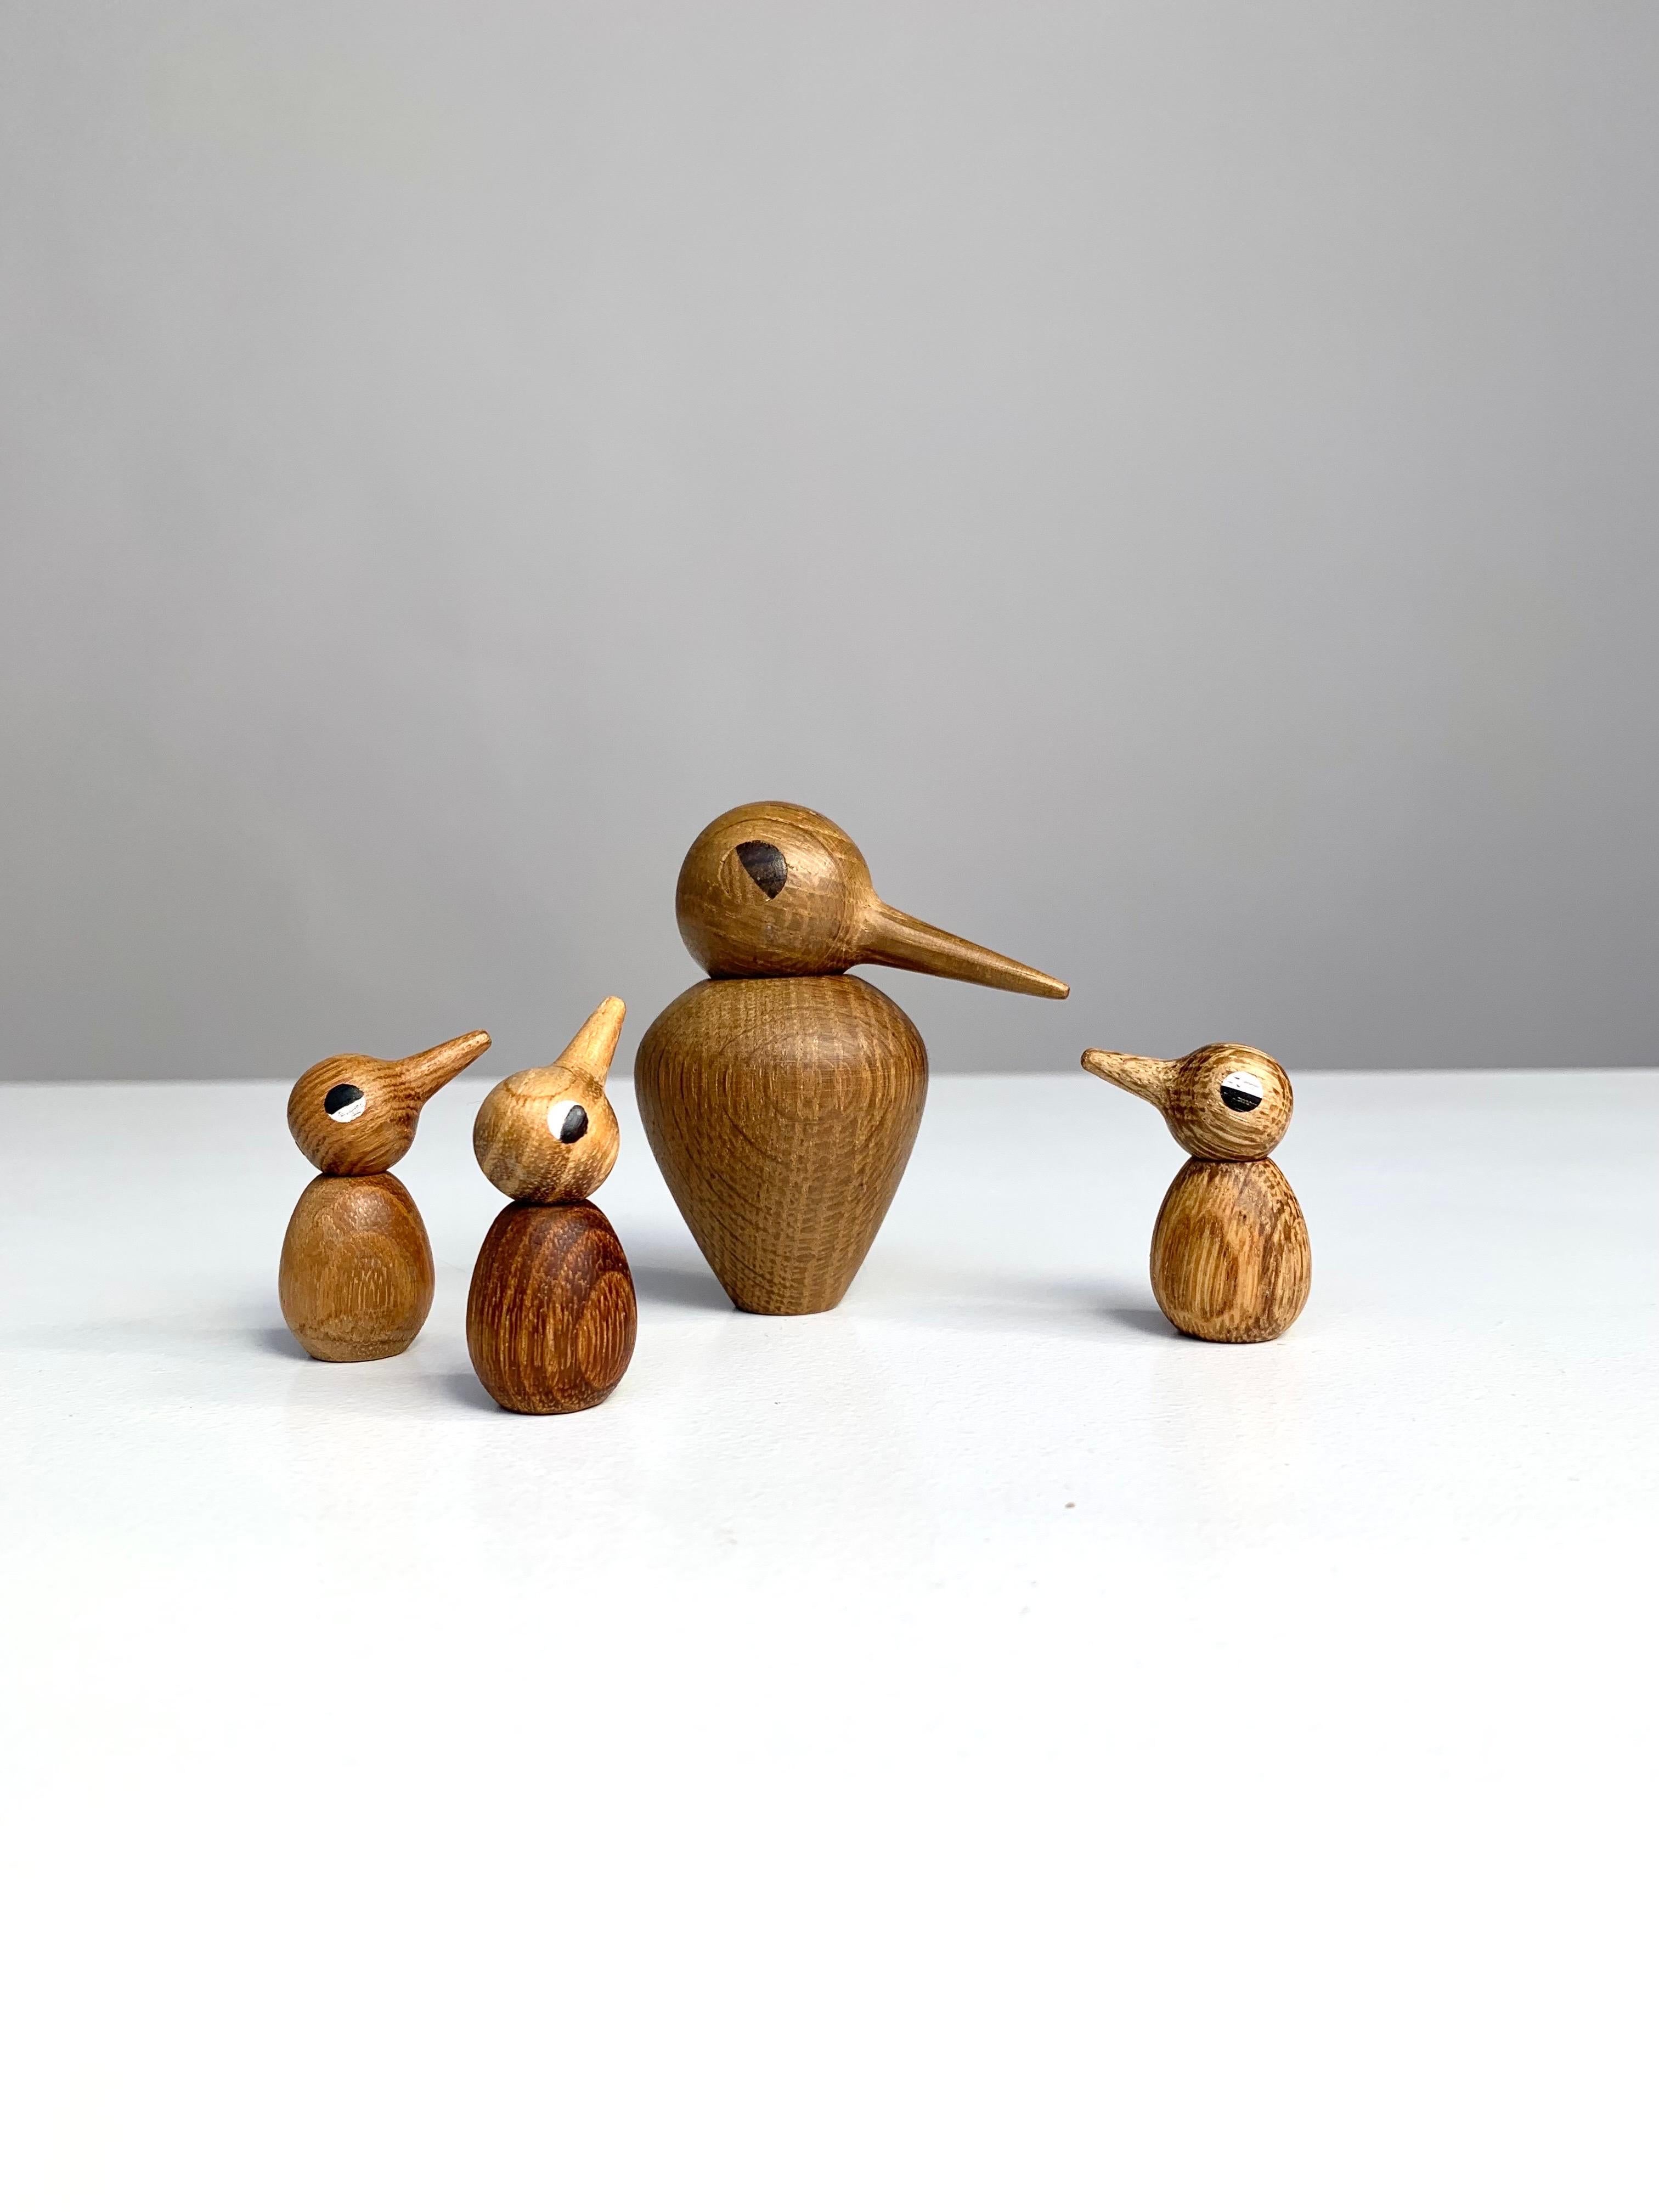 Rare bird family by Kristian Vedel, designed in 1959 for Torben Ørskov, Denmark.

This set was hand crafted in the 1960s, the baby birds are no longer in production. The larger bird is the medium sized bird of all three models ever produced and